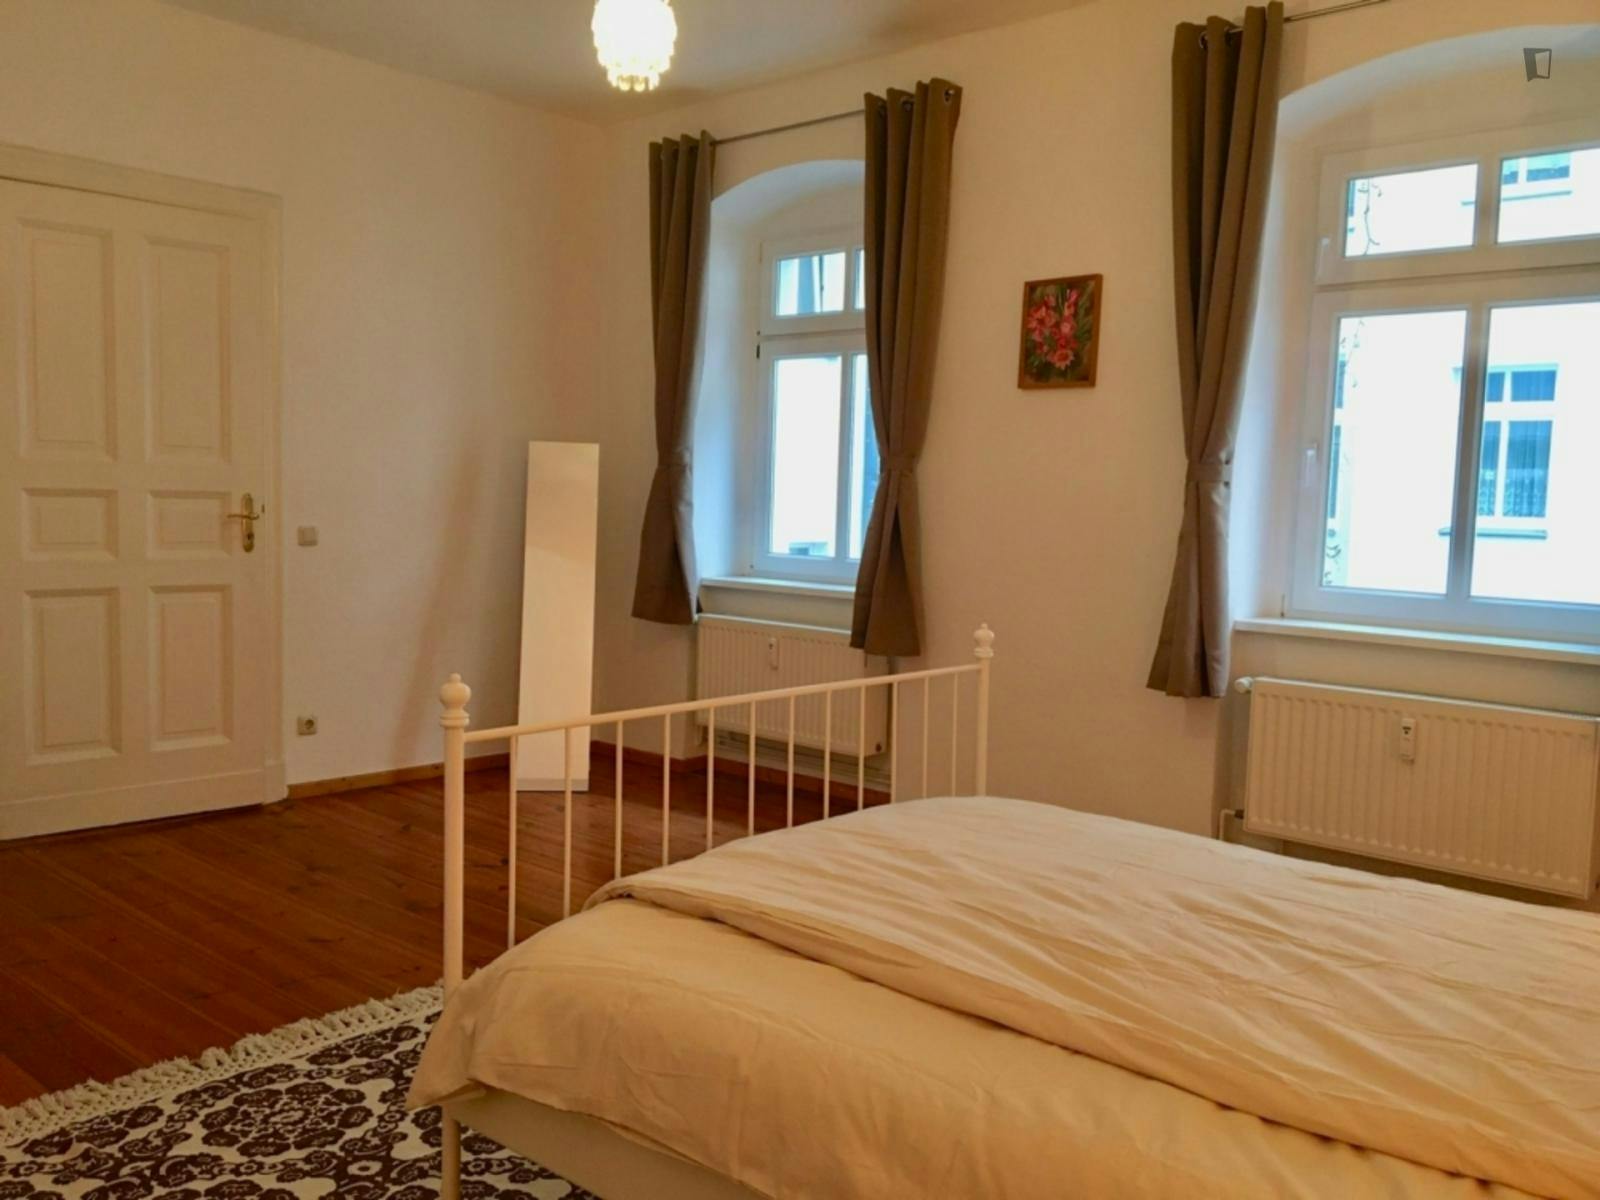 Lovely 1-bedroom apartment in the district of Prenzlauer Berg